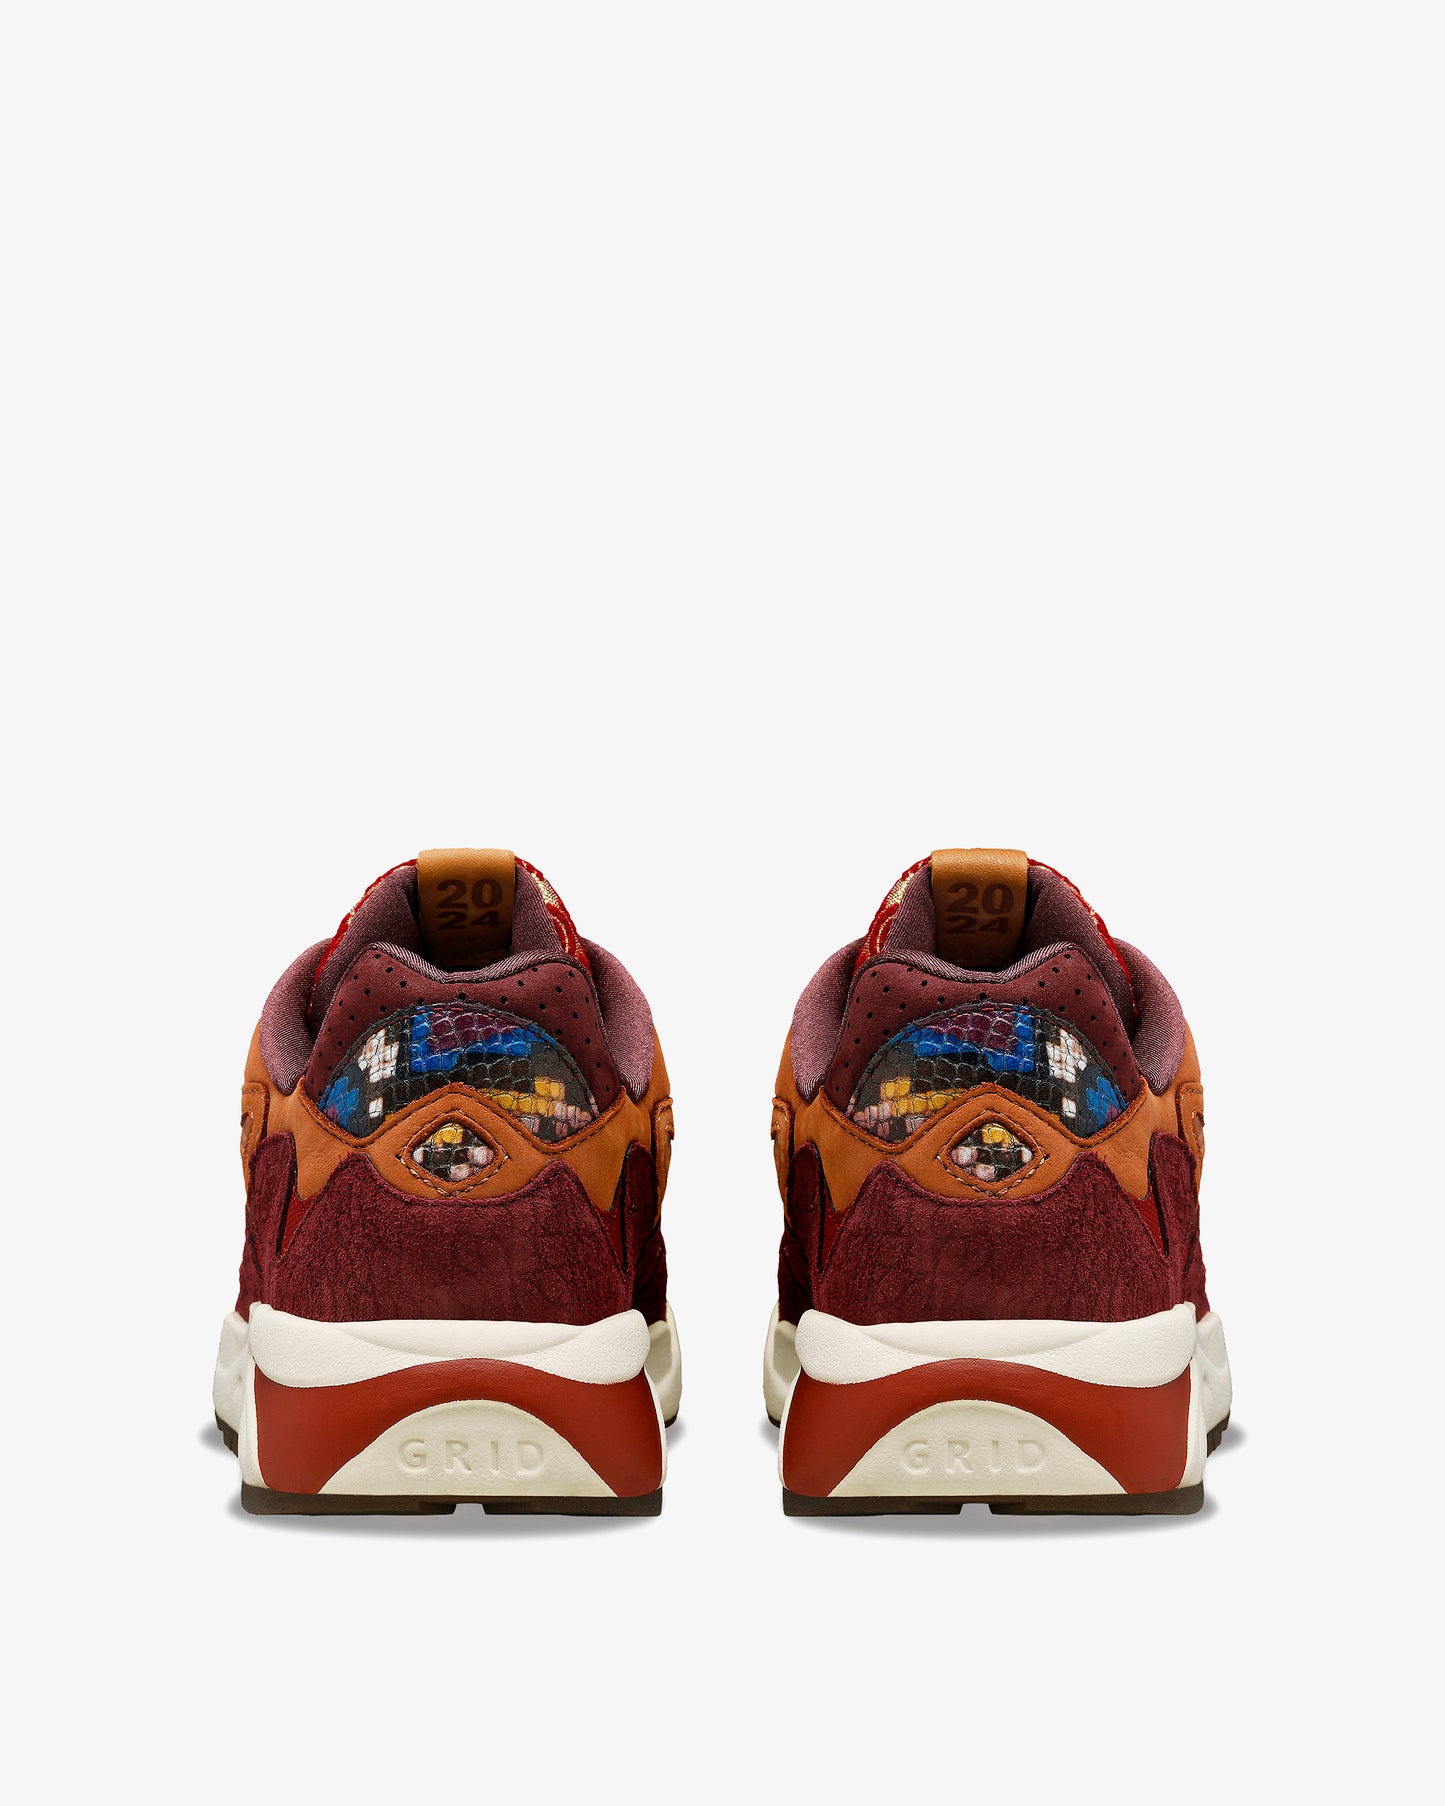 Saucony Grid Shadow 2 Chinese New Year "Dragon"